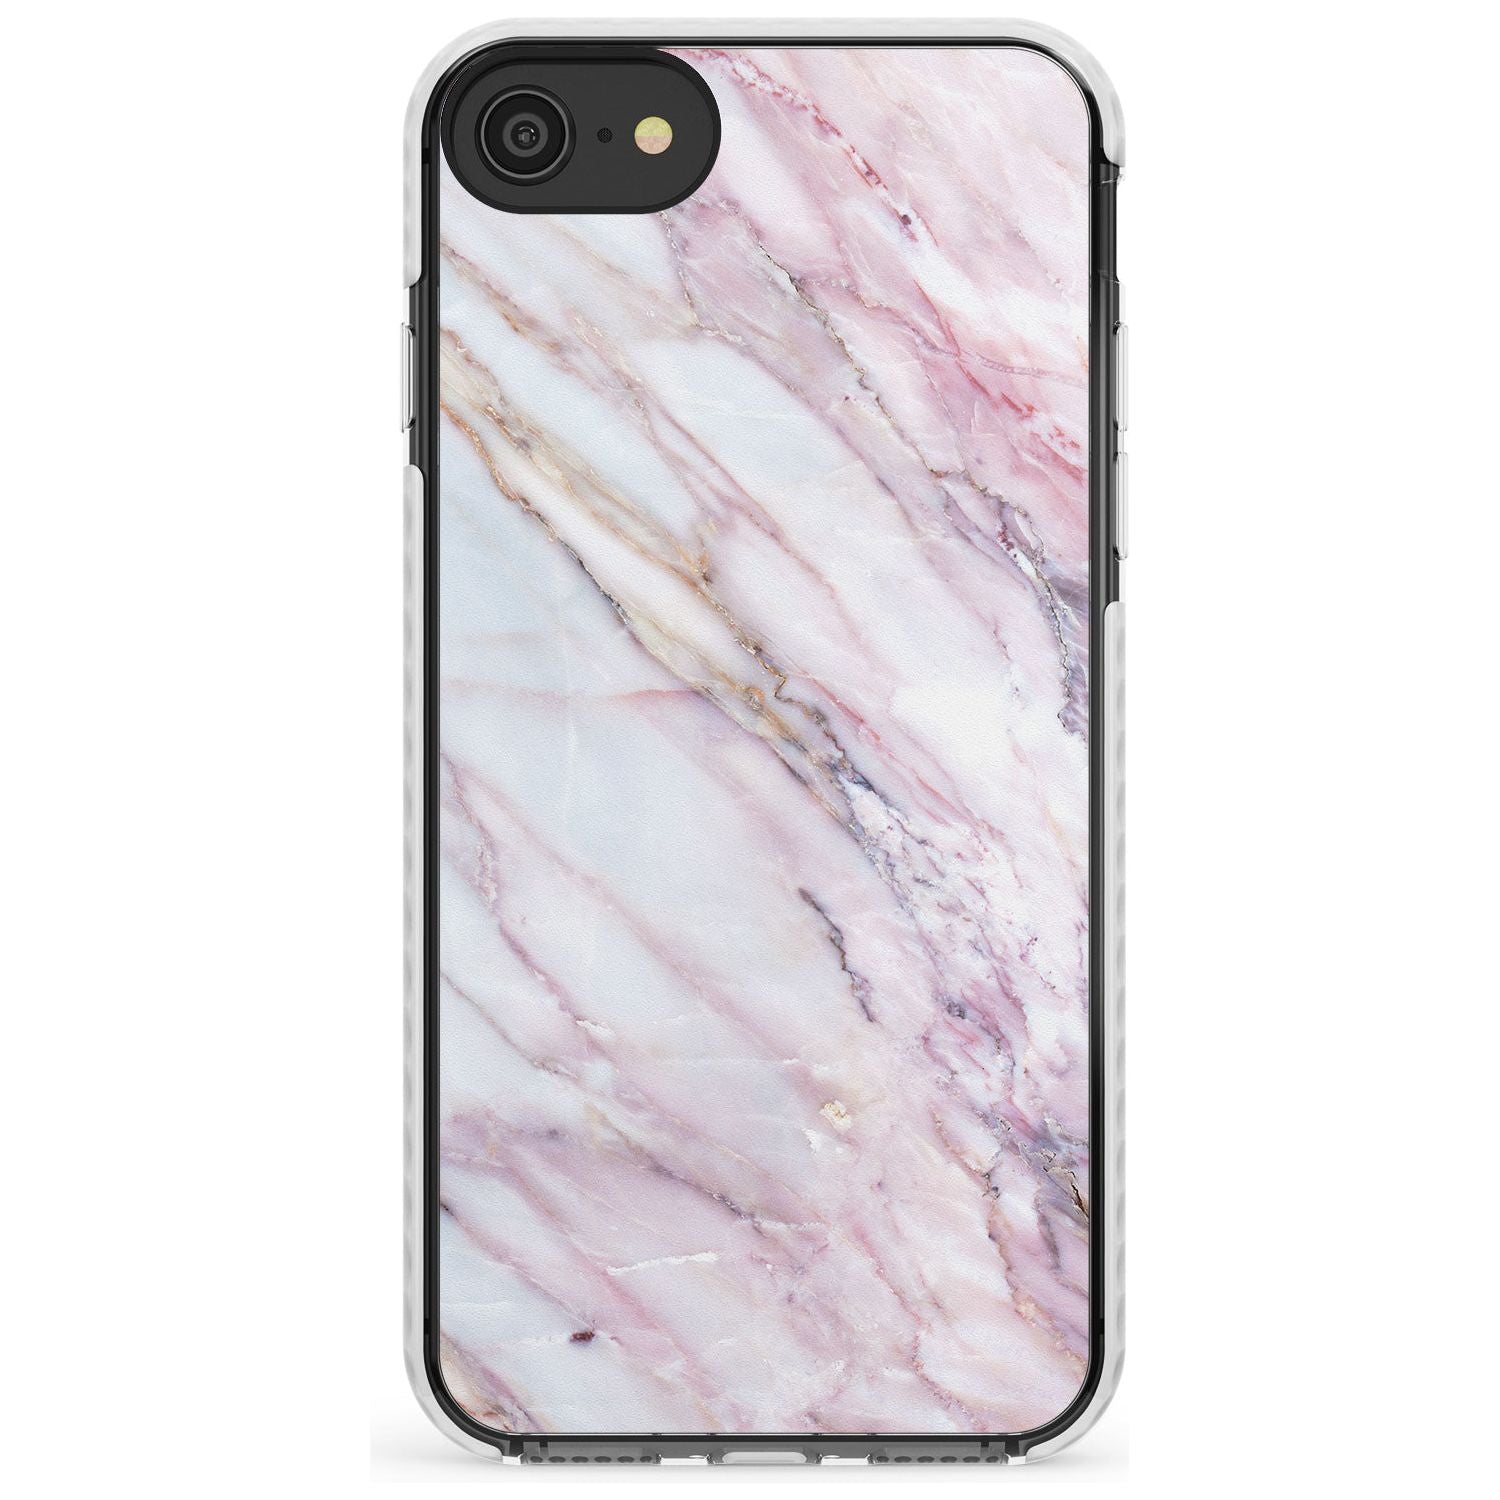 White, Pink & Purple Onyx Marble Texture Slim TPU Phone Case for iPhone SE 8 7 Plus